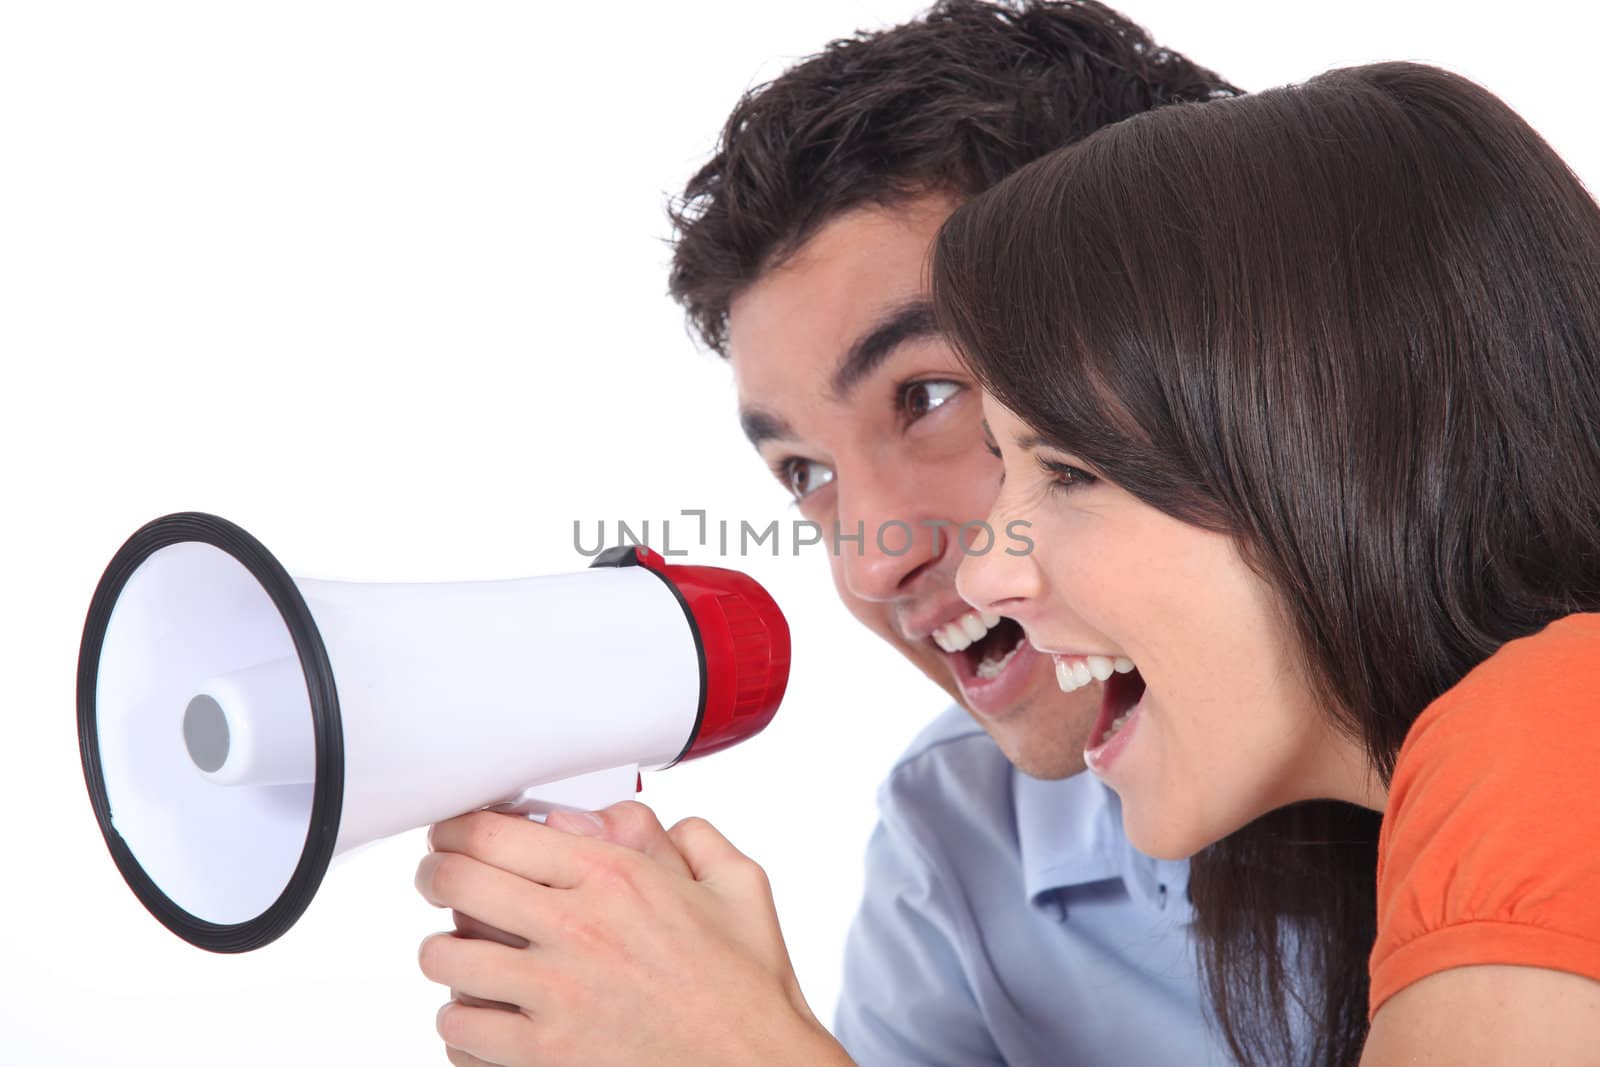 Young couple shouting into a megaphone